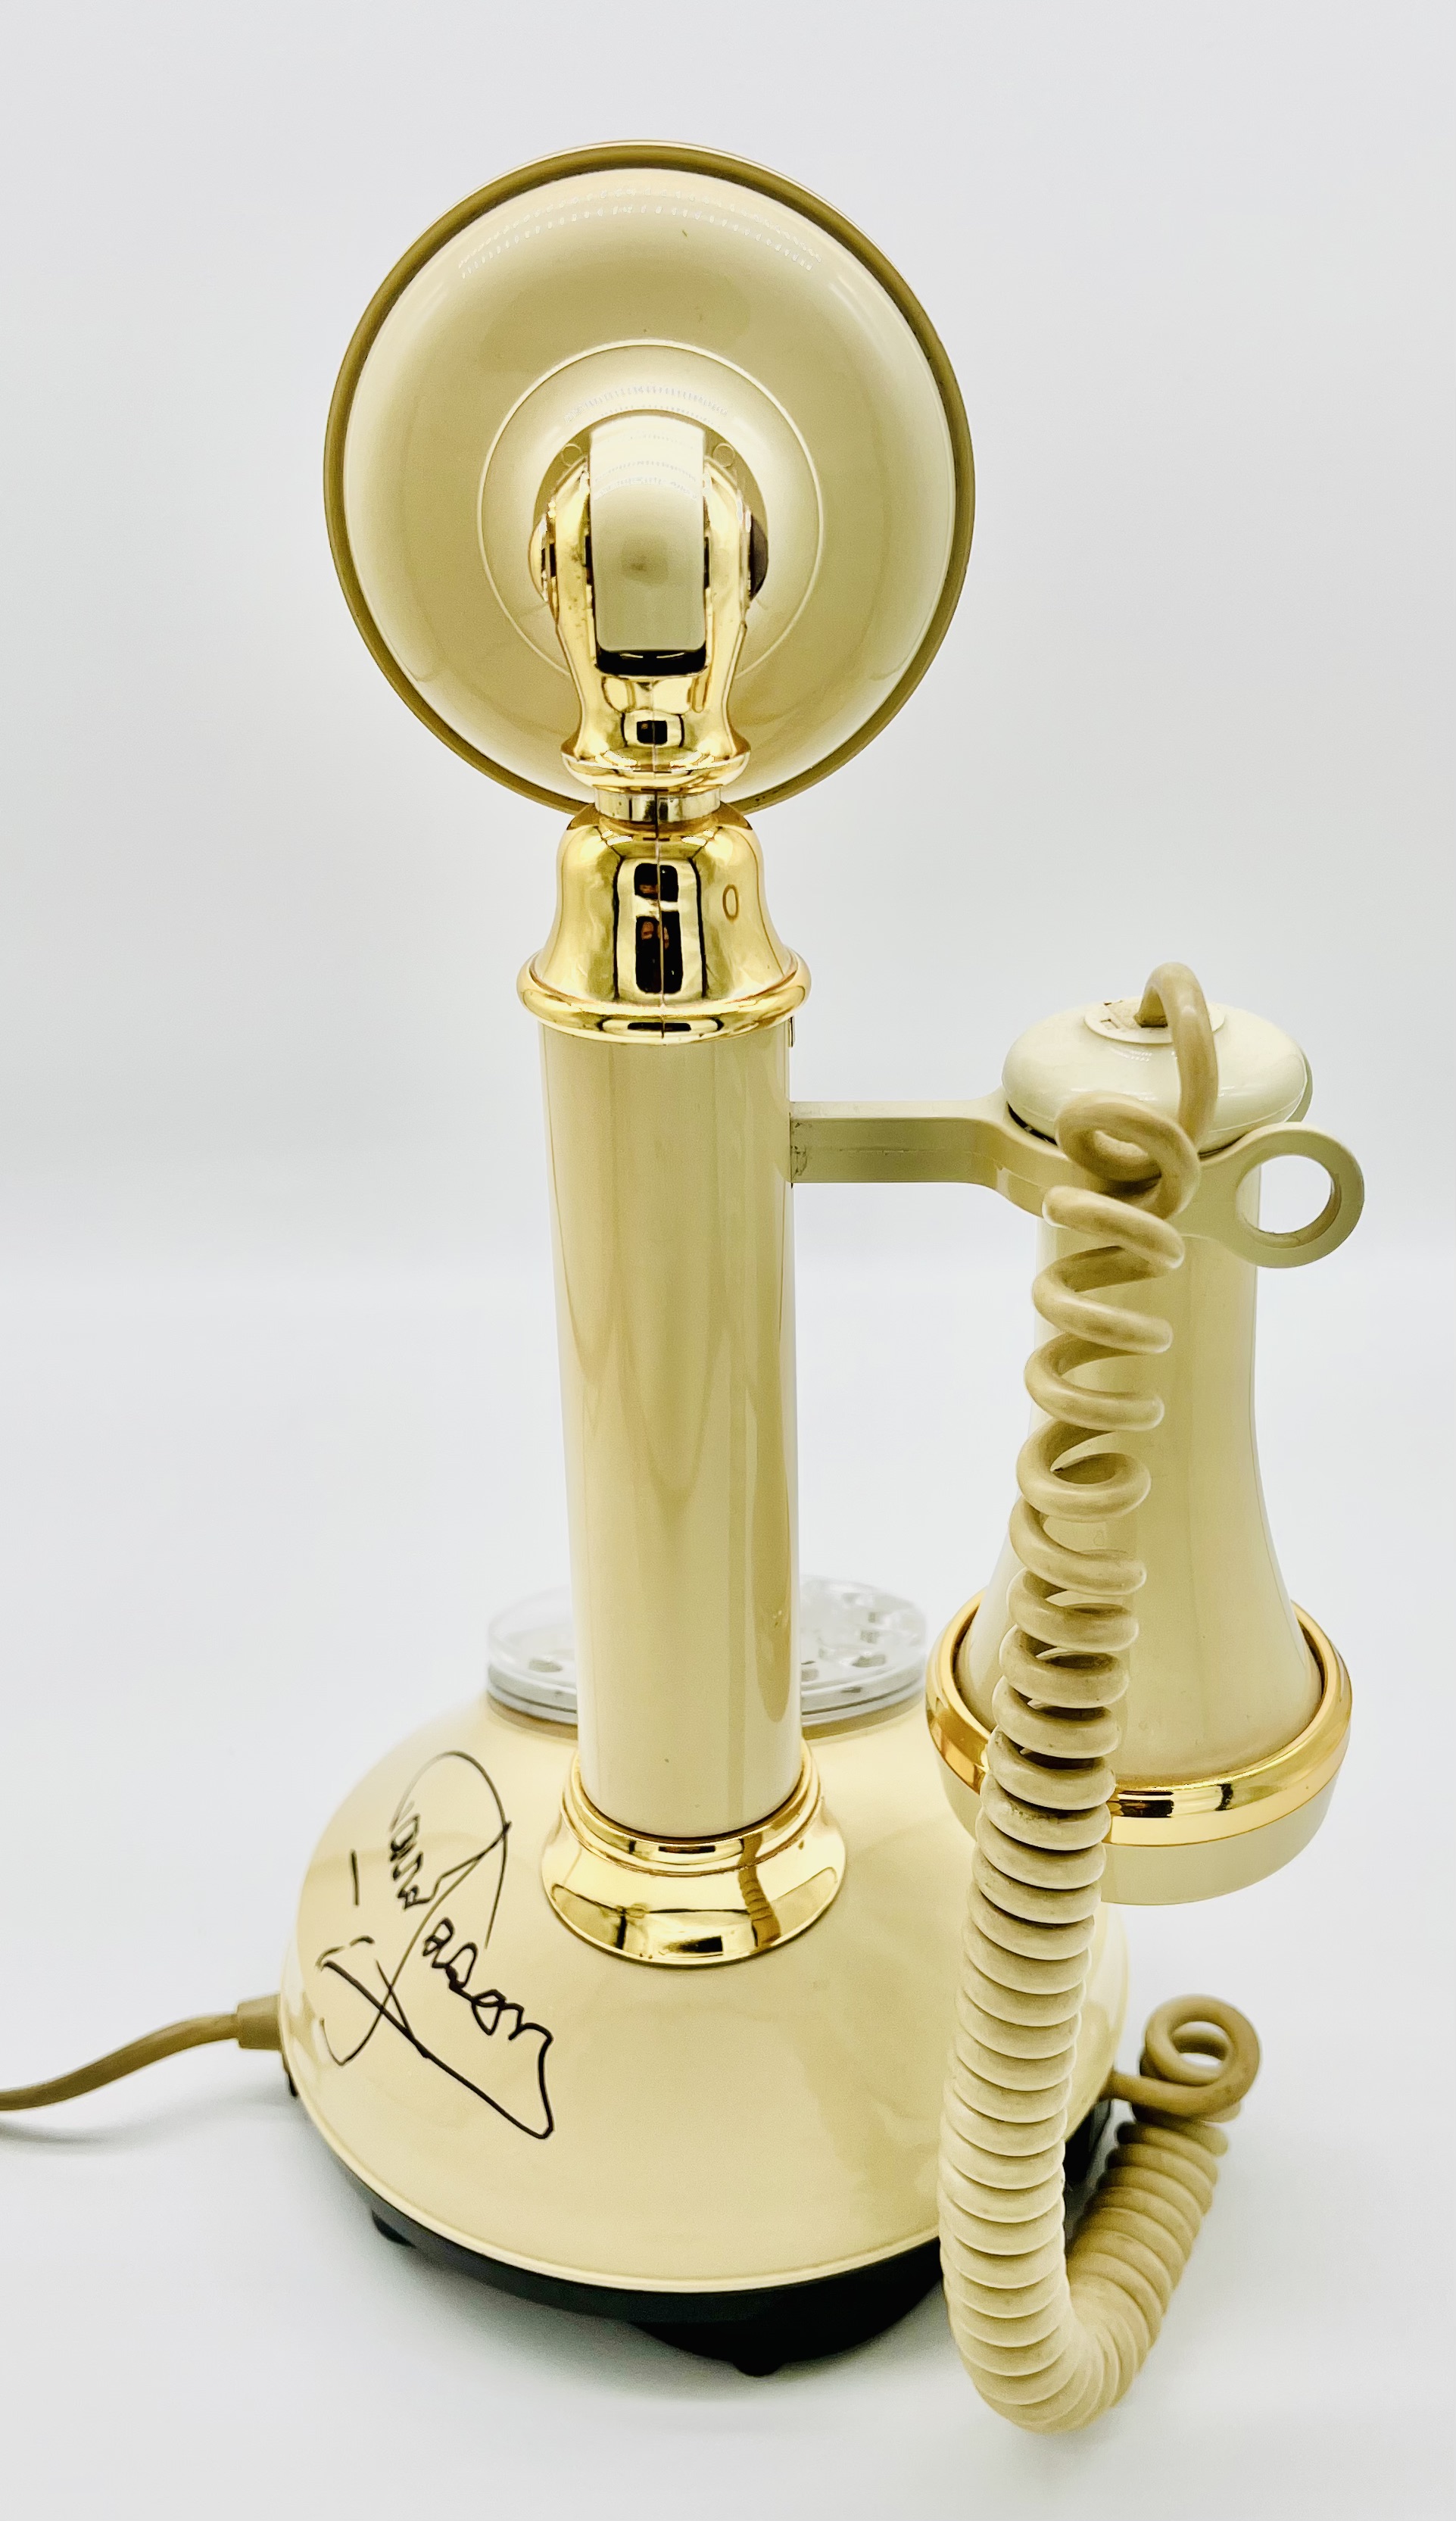 ONLY FOOLS & HORSES - DEL BOY'S CANDLESTICK TELEPHONE - Image 5 of 6